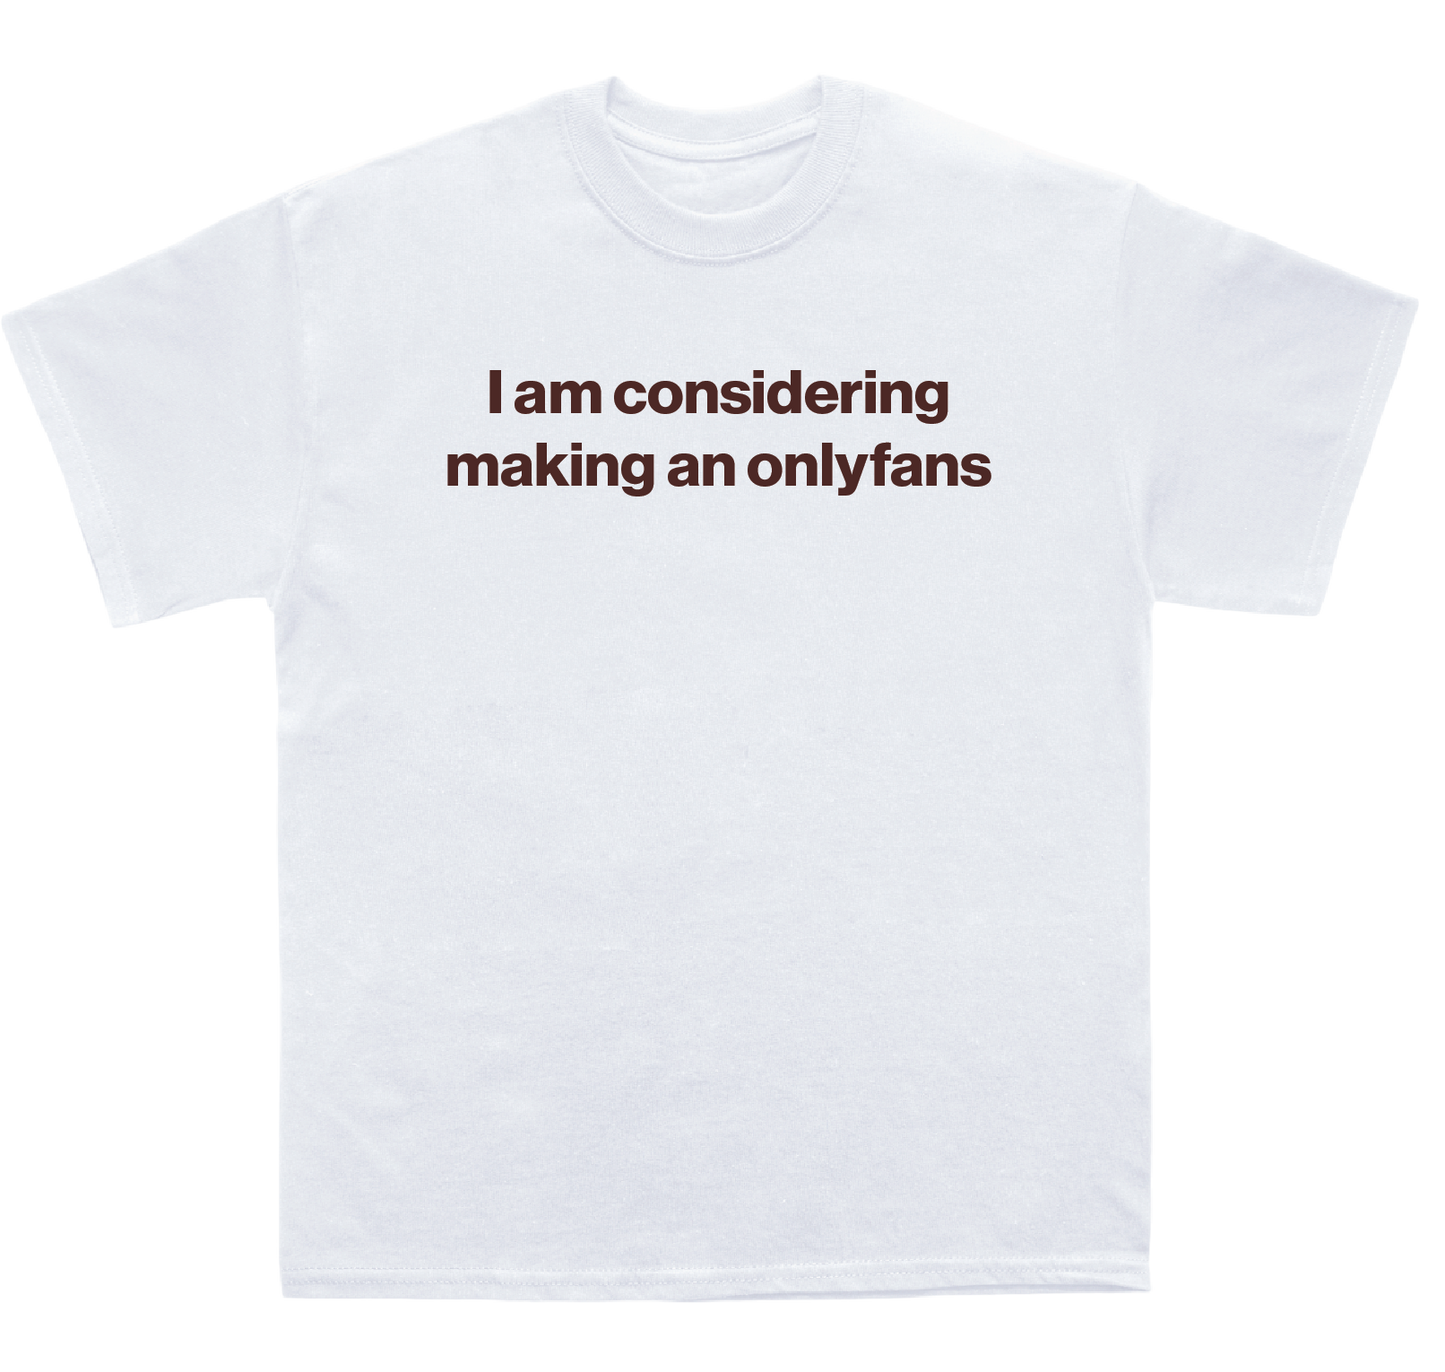 I am considering making an onlyfans shirt